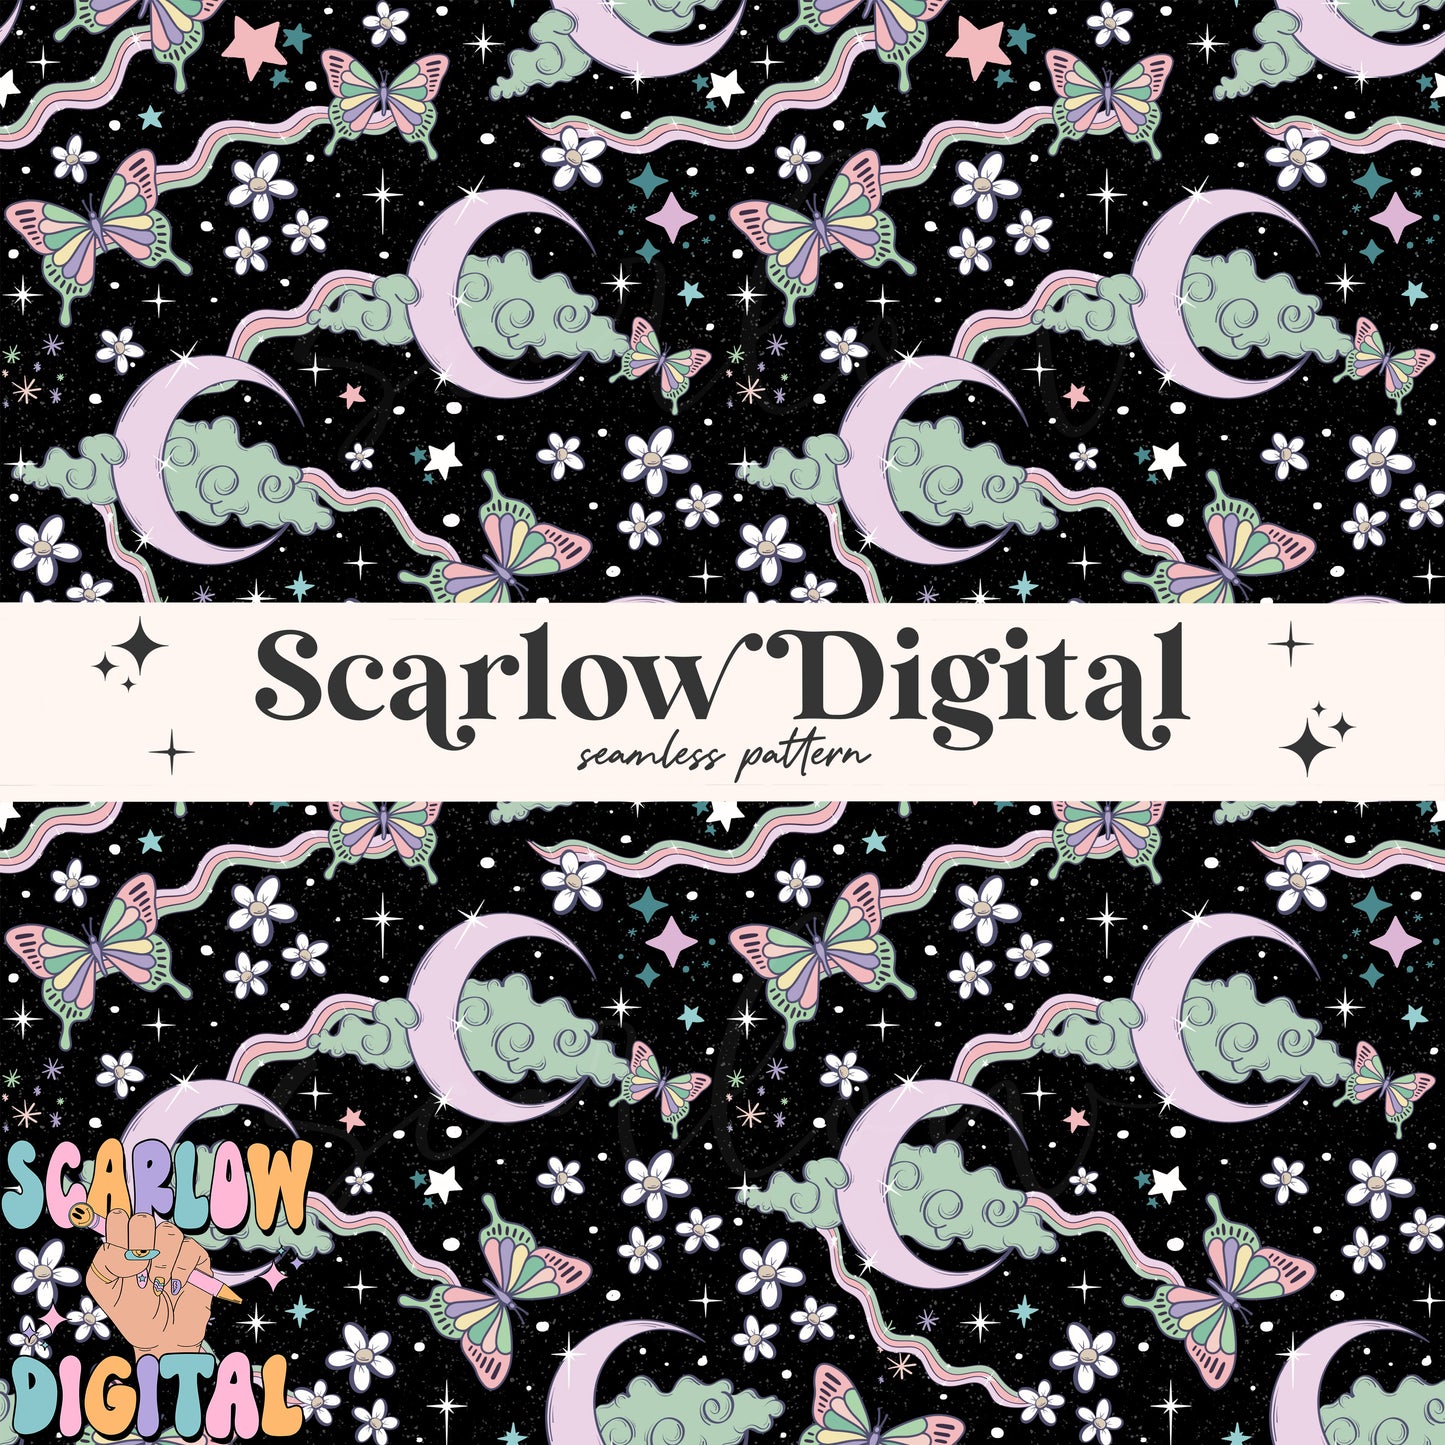 Dreamy Galaxy Seamless Pattern Digital Design Download, butterfly seamless prints, moon and stars digital paper, stars and flowers patterns